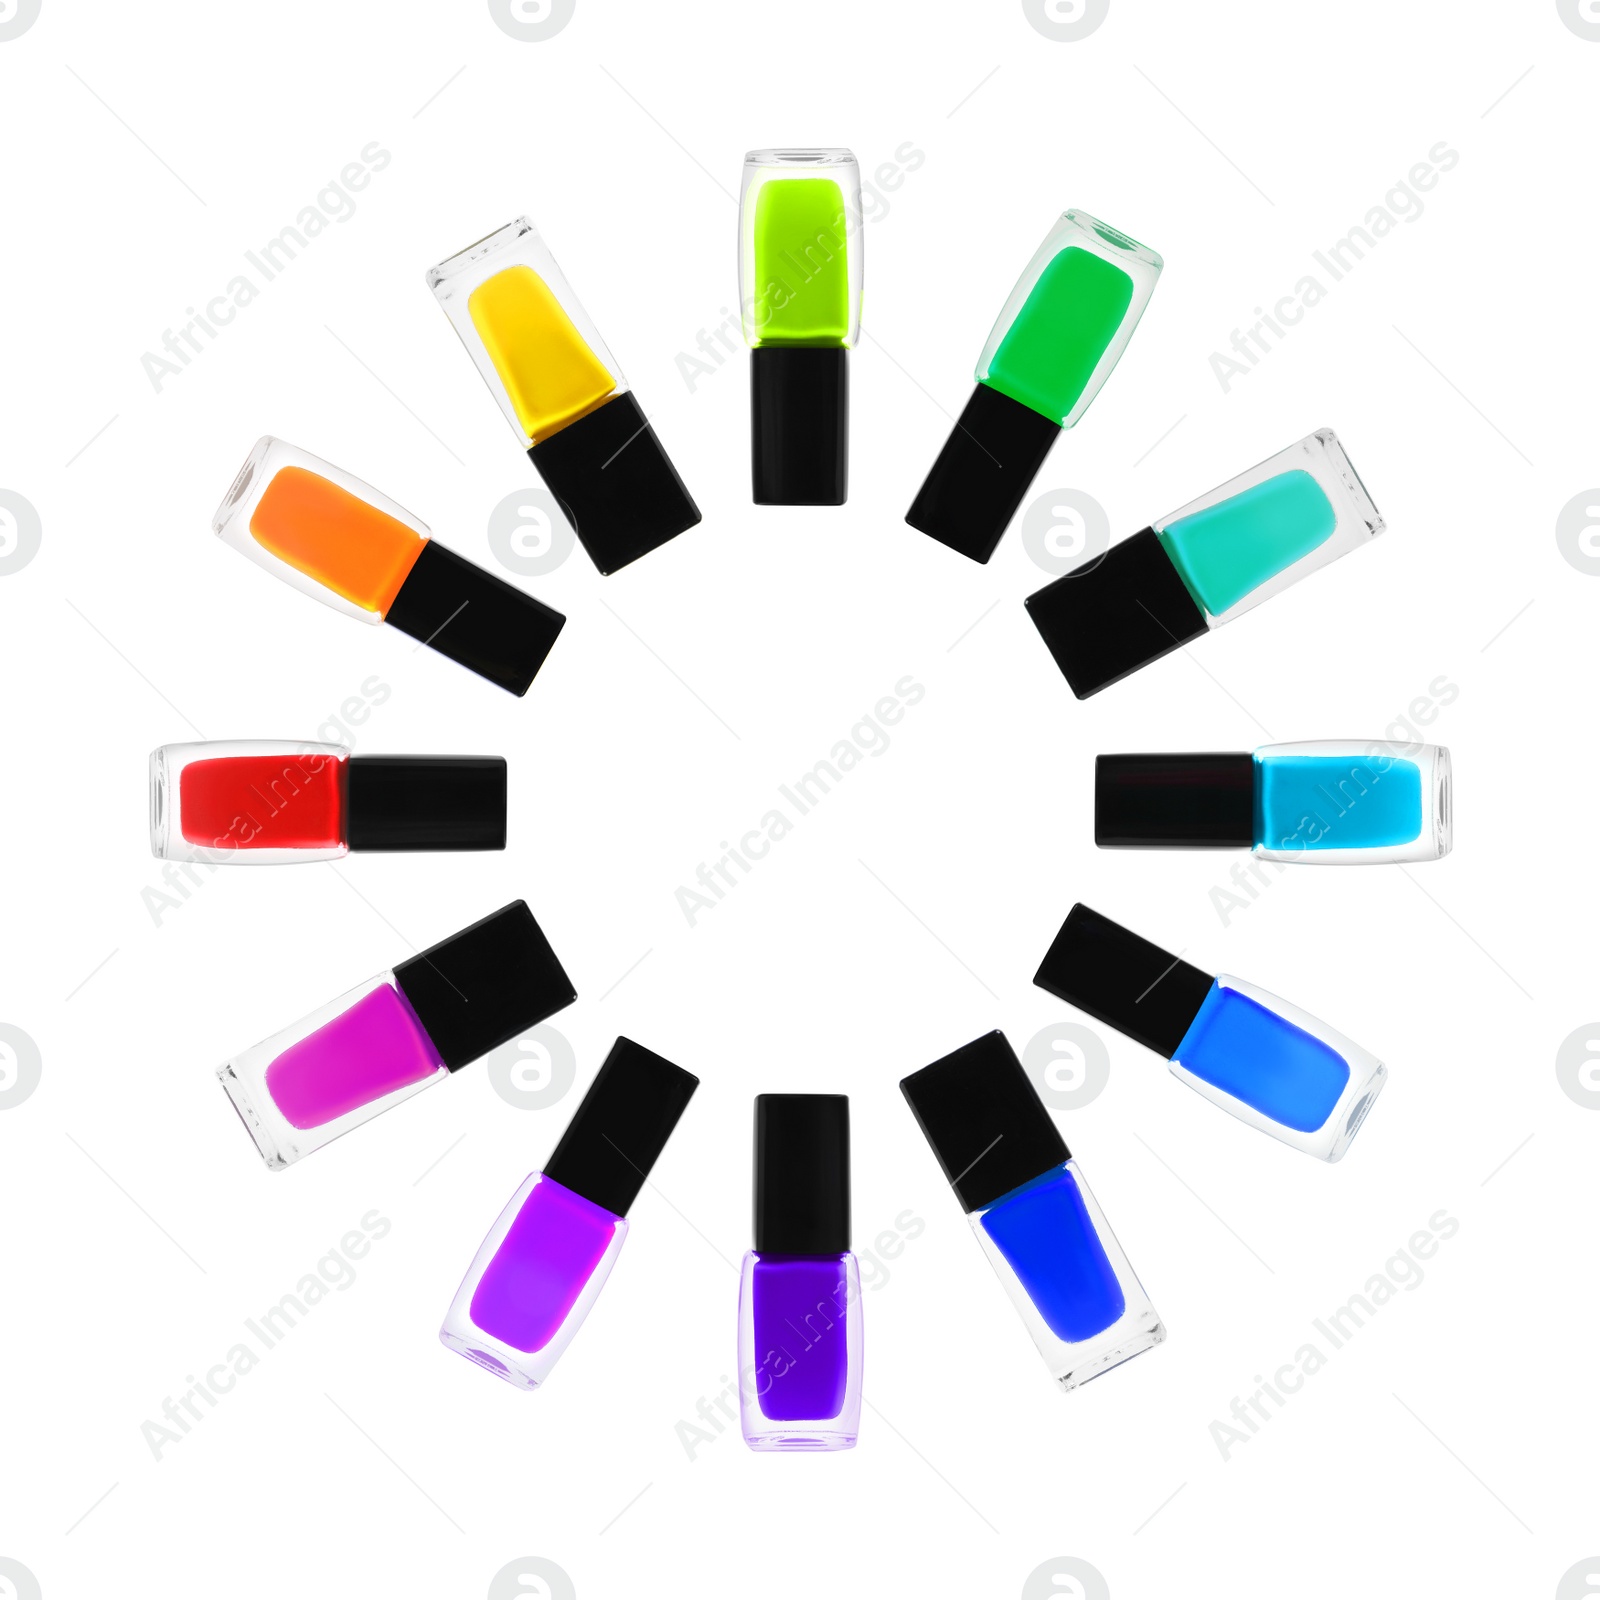 Image of Set of different nail polishes on white background, top view